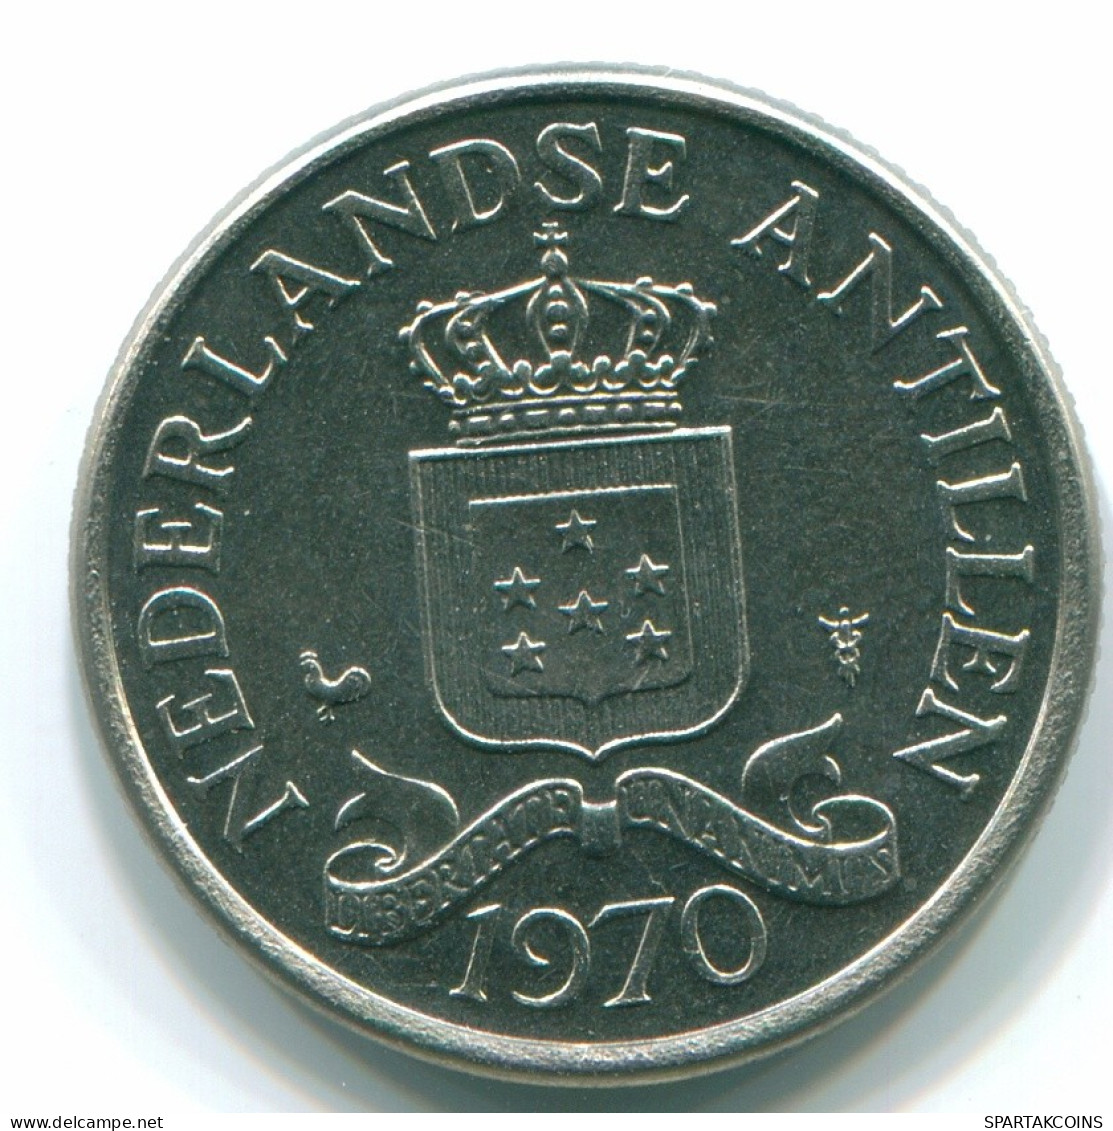 25 CENTS 1970 NETHERLANDS ANTILLES Nickel Colonial Coin #S11430.U.A - Netherlands Antilles